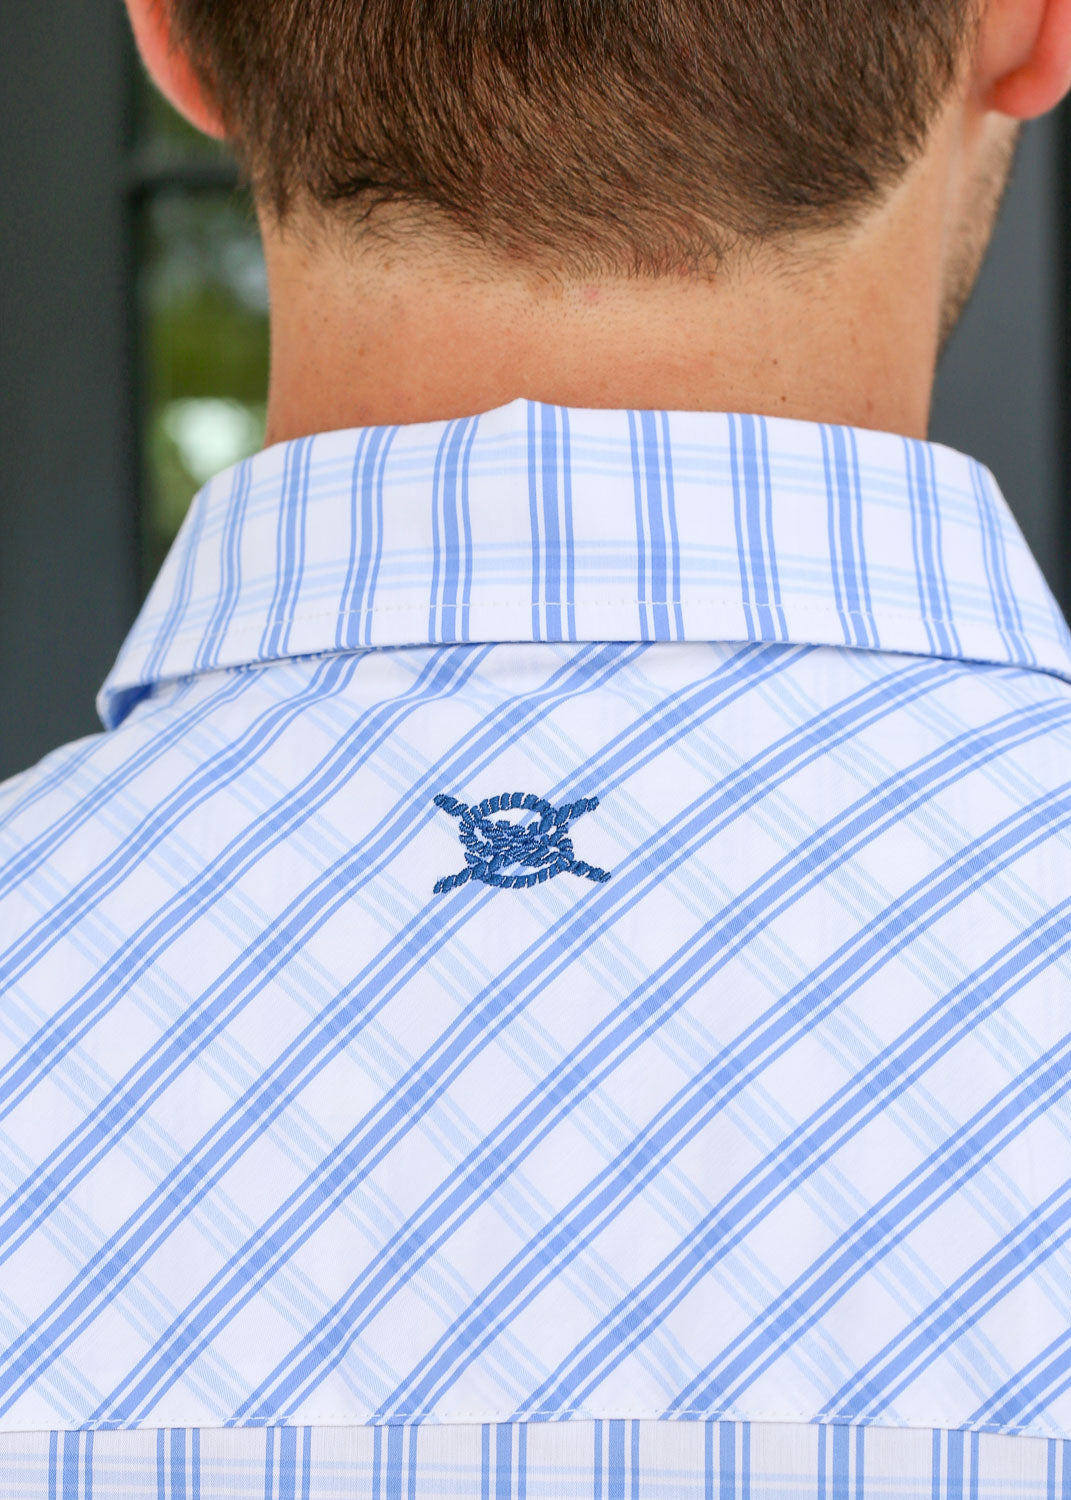 How the Pearl Snap Shirt Maintains Its Otherworldly Popularity - 5280